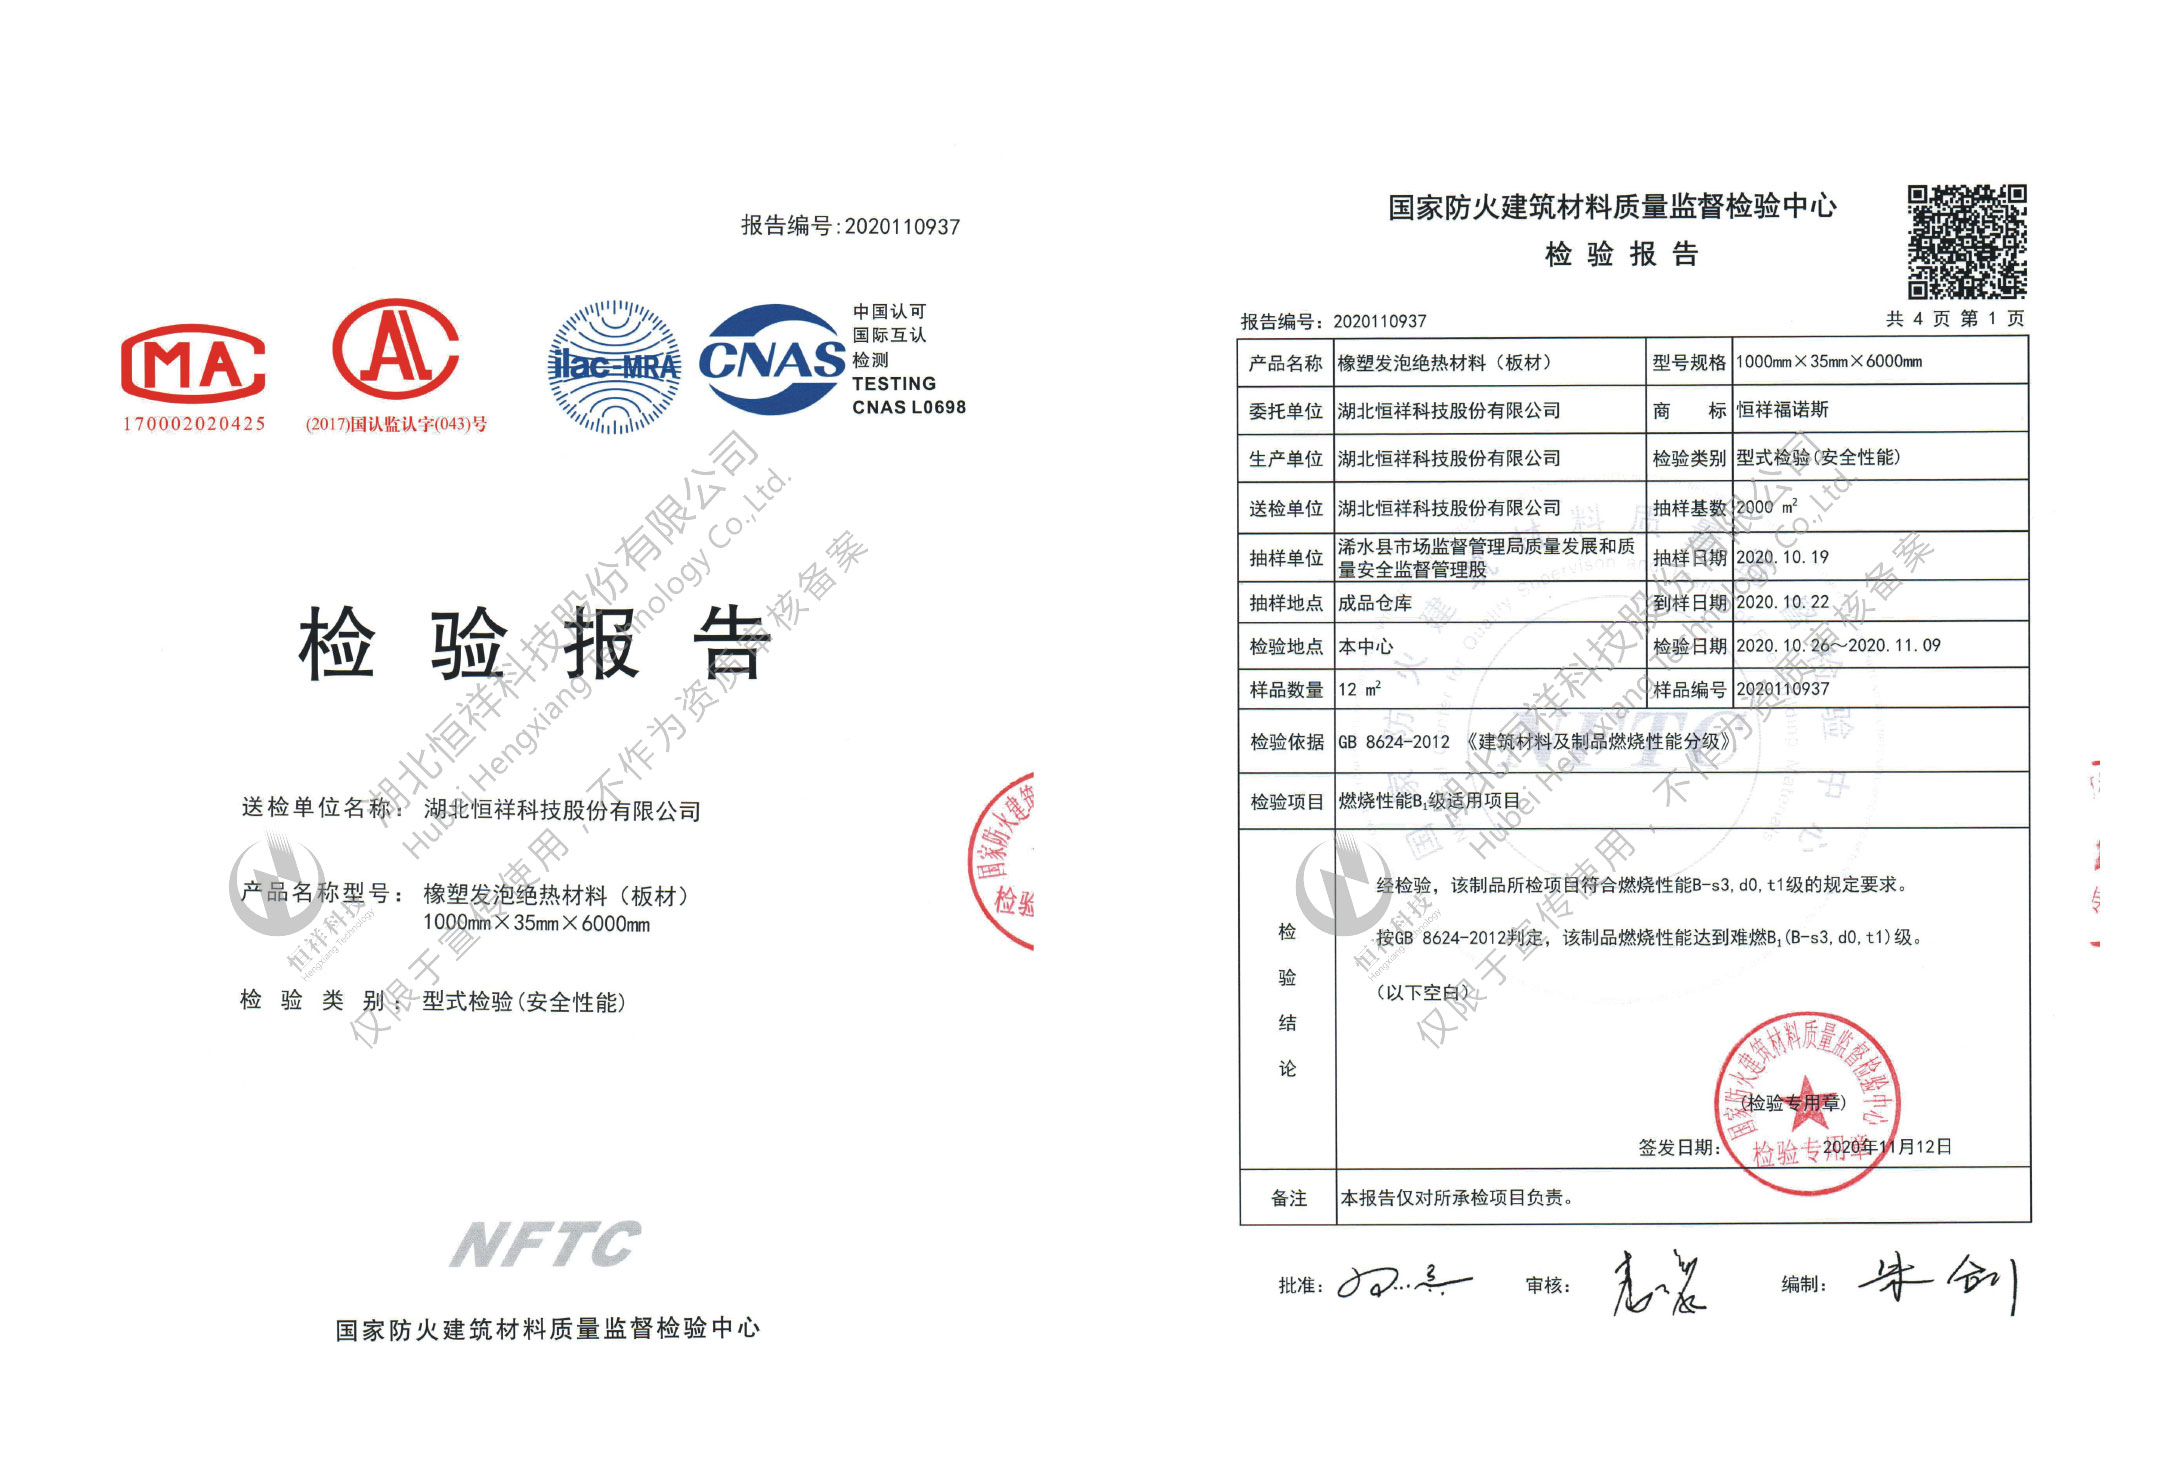 HengXiang  Funos NFTC inspection safety performance peport (Plate)